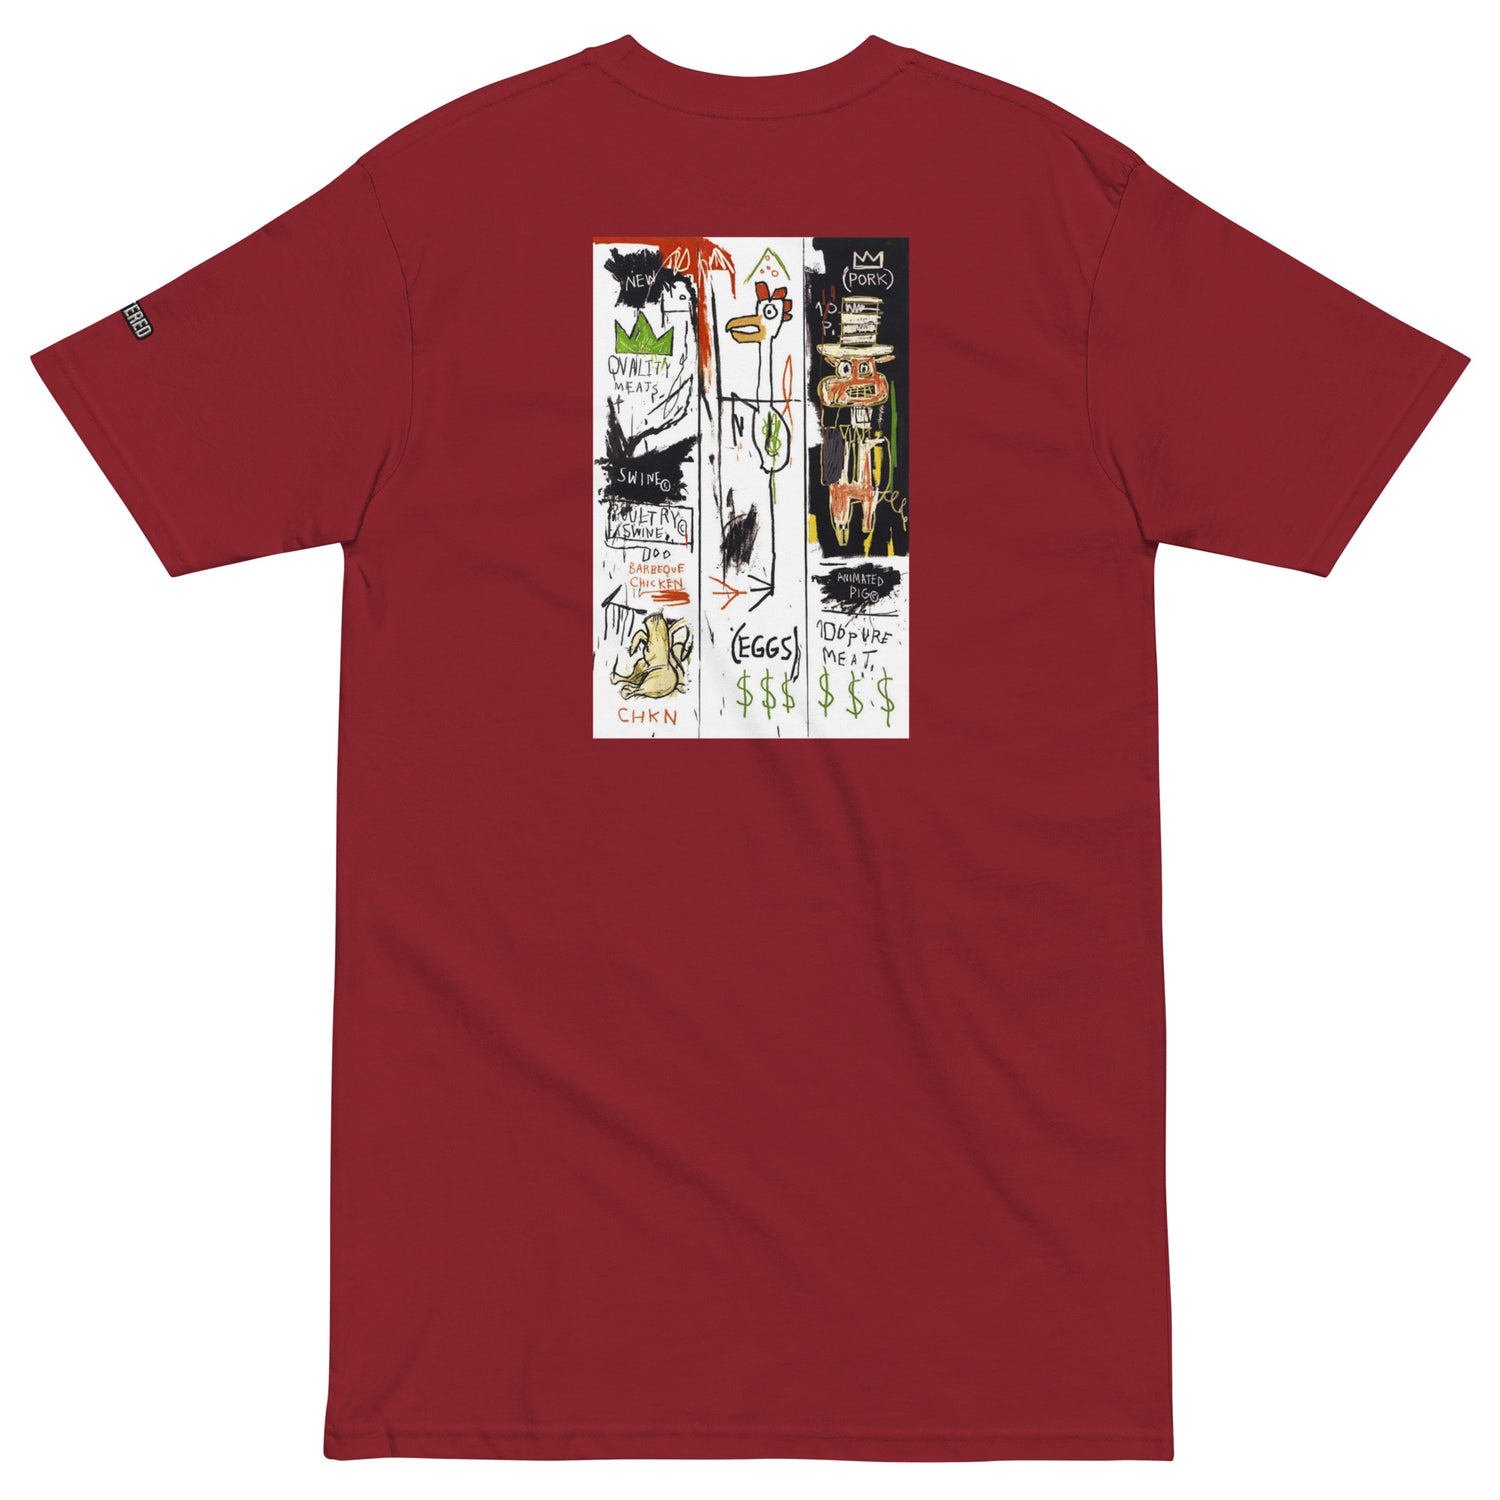 Jean-Michel Basquiat "Quality Meats for the Public" Artwork Embroidered + Printed Premium Red Streetwear T-shirt Scattered